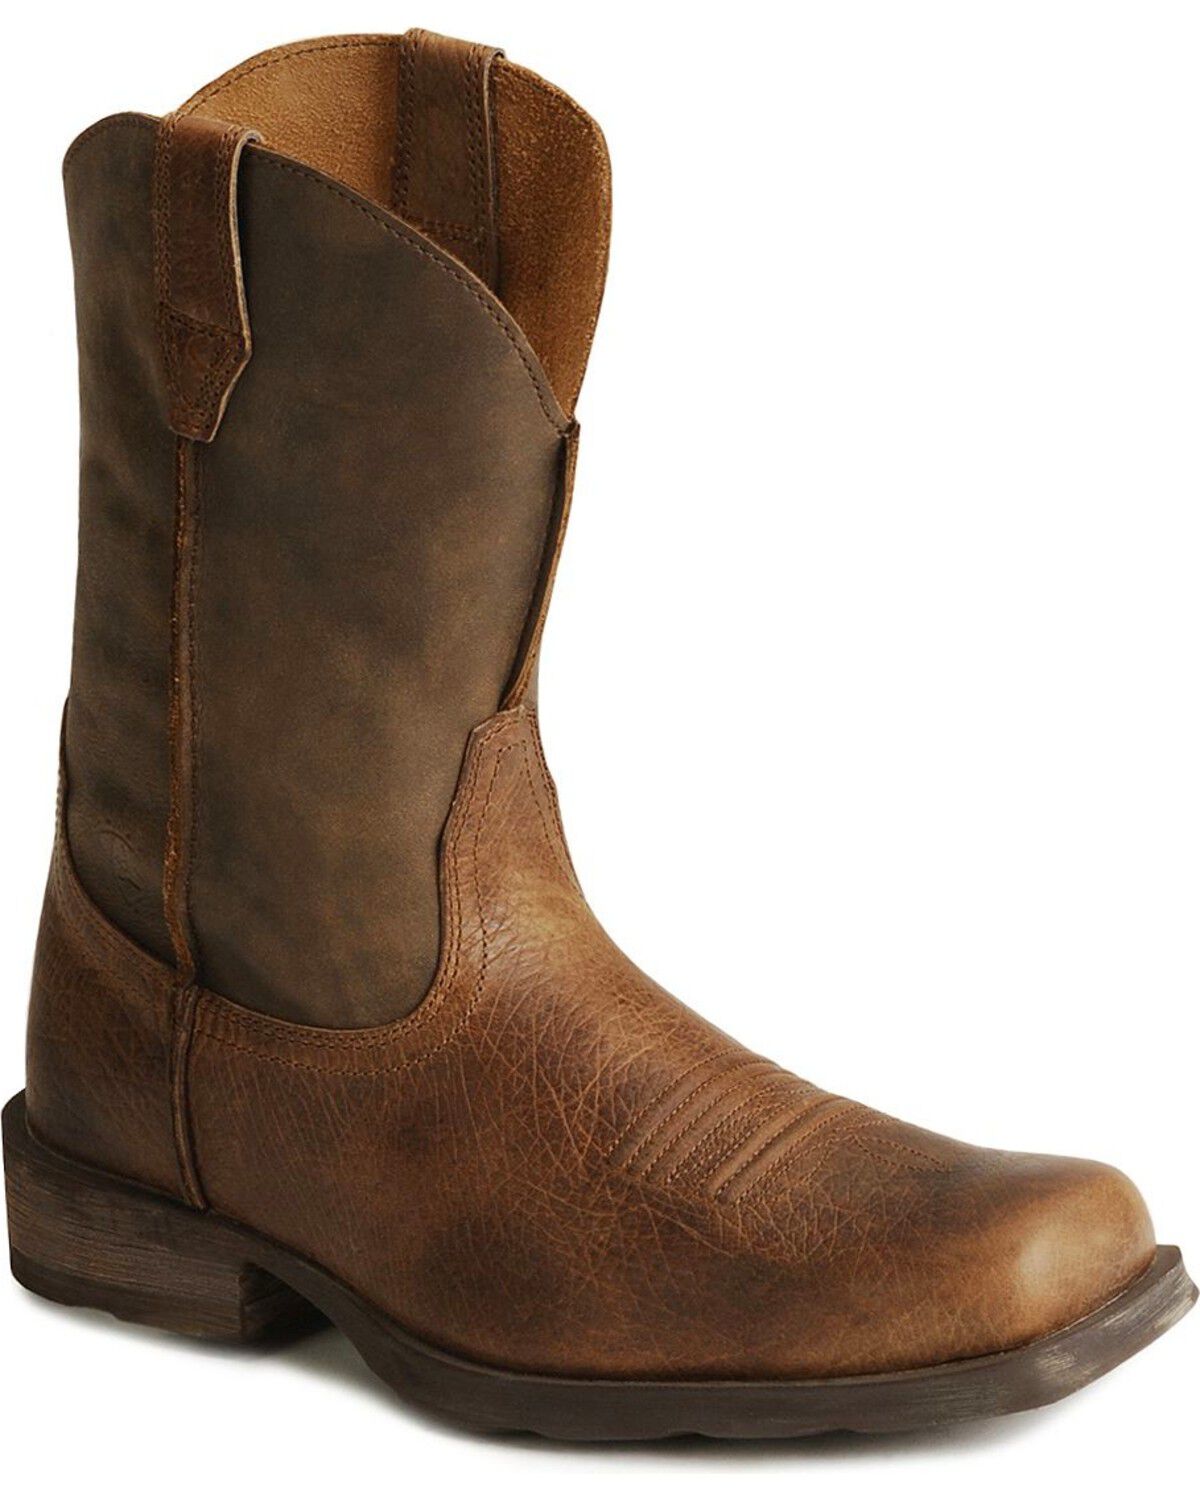 mens square toe boots clearance